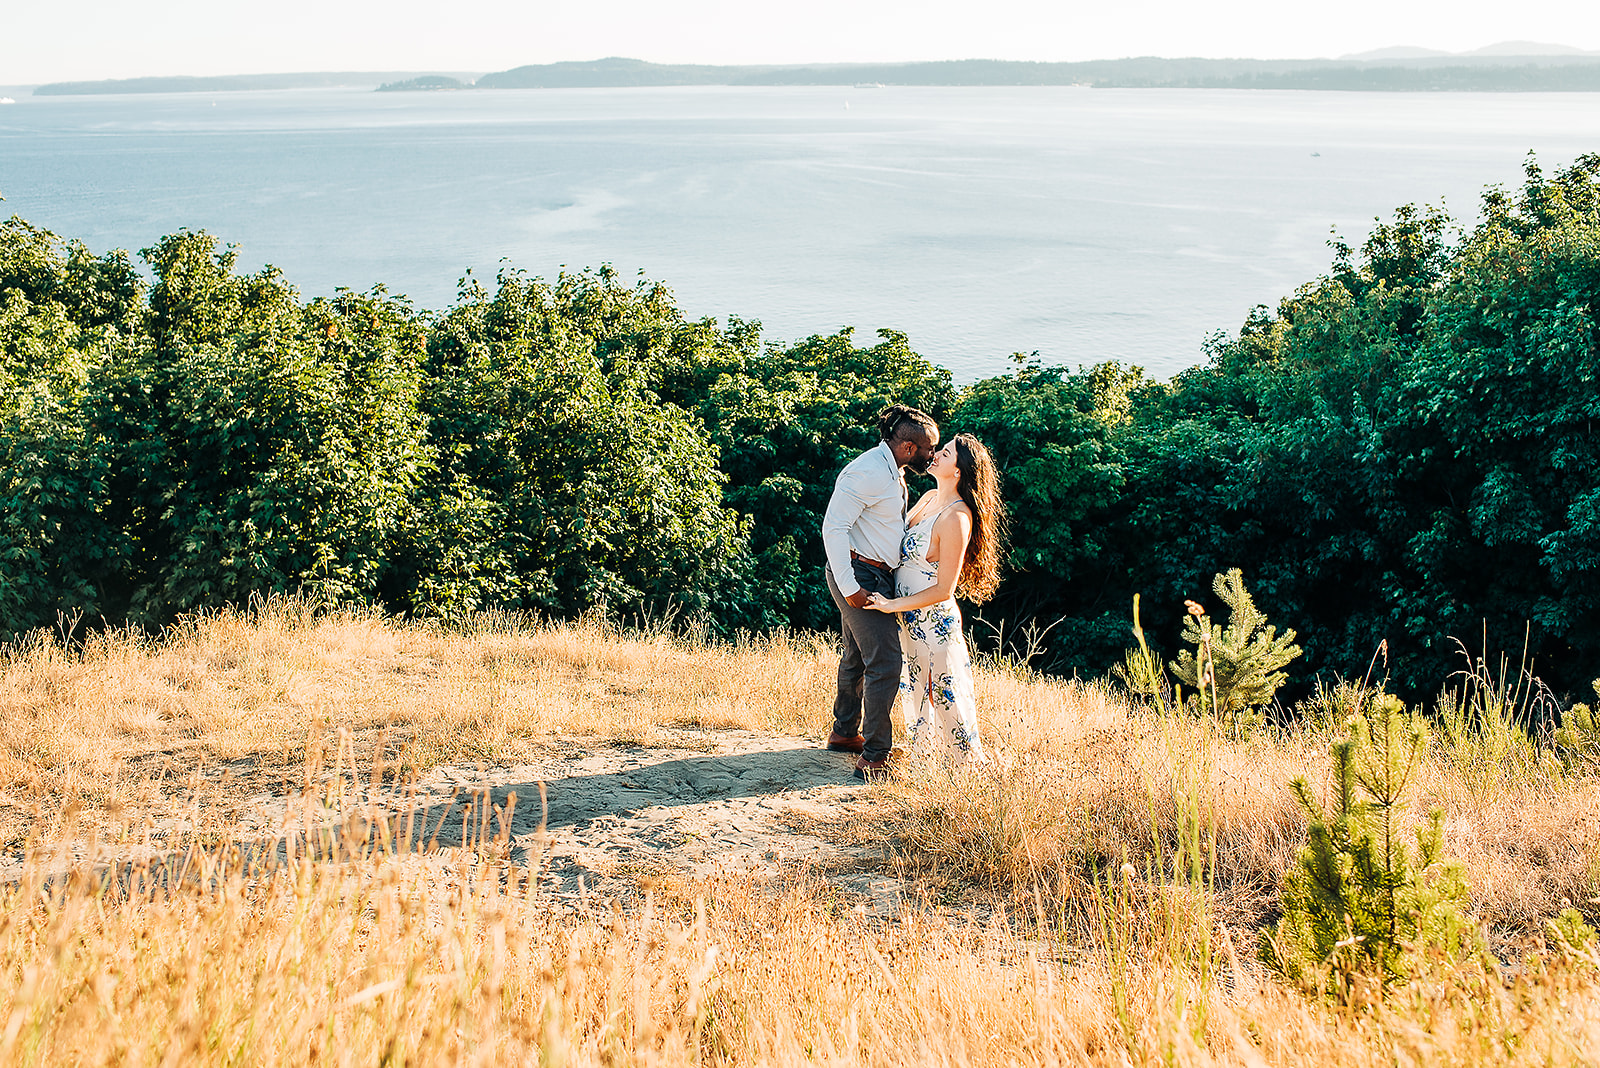 An interracial couple is photographed for their engagement session at Discovery Park in Seatttle, WA